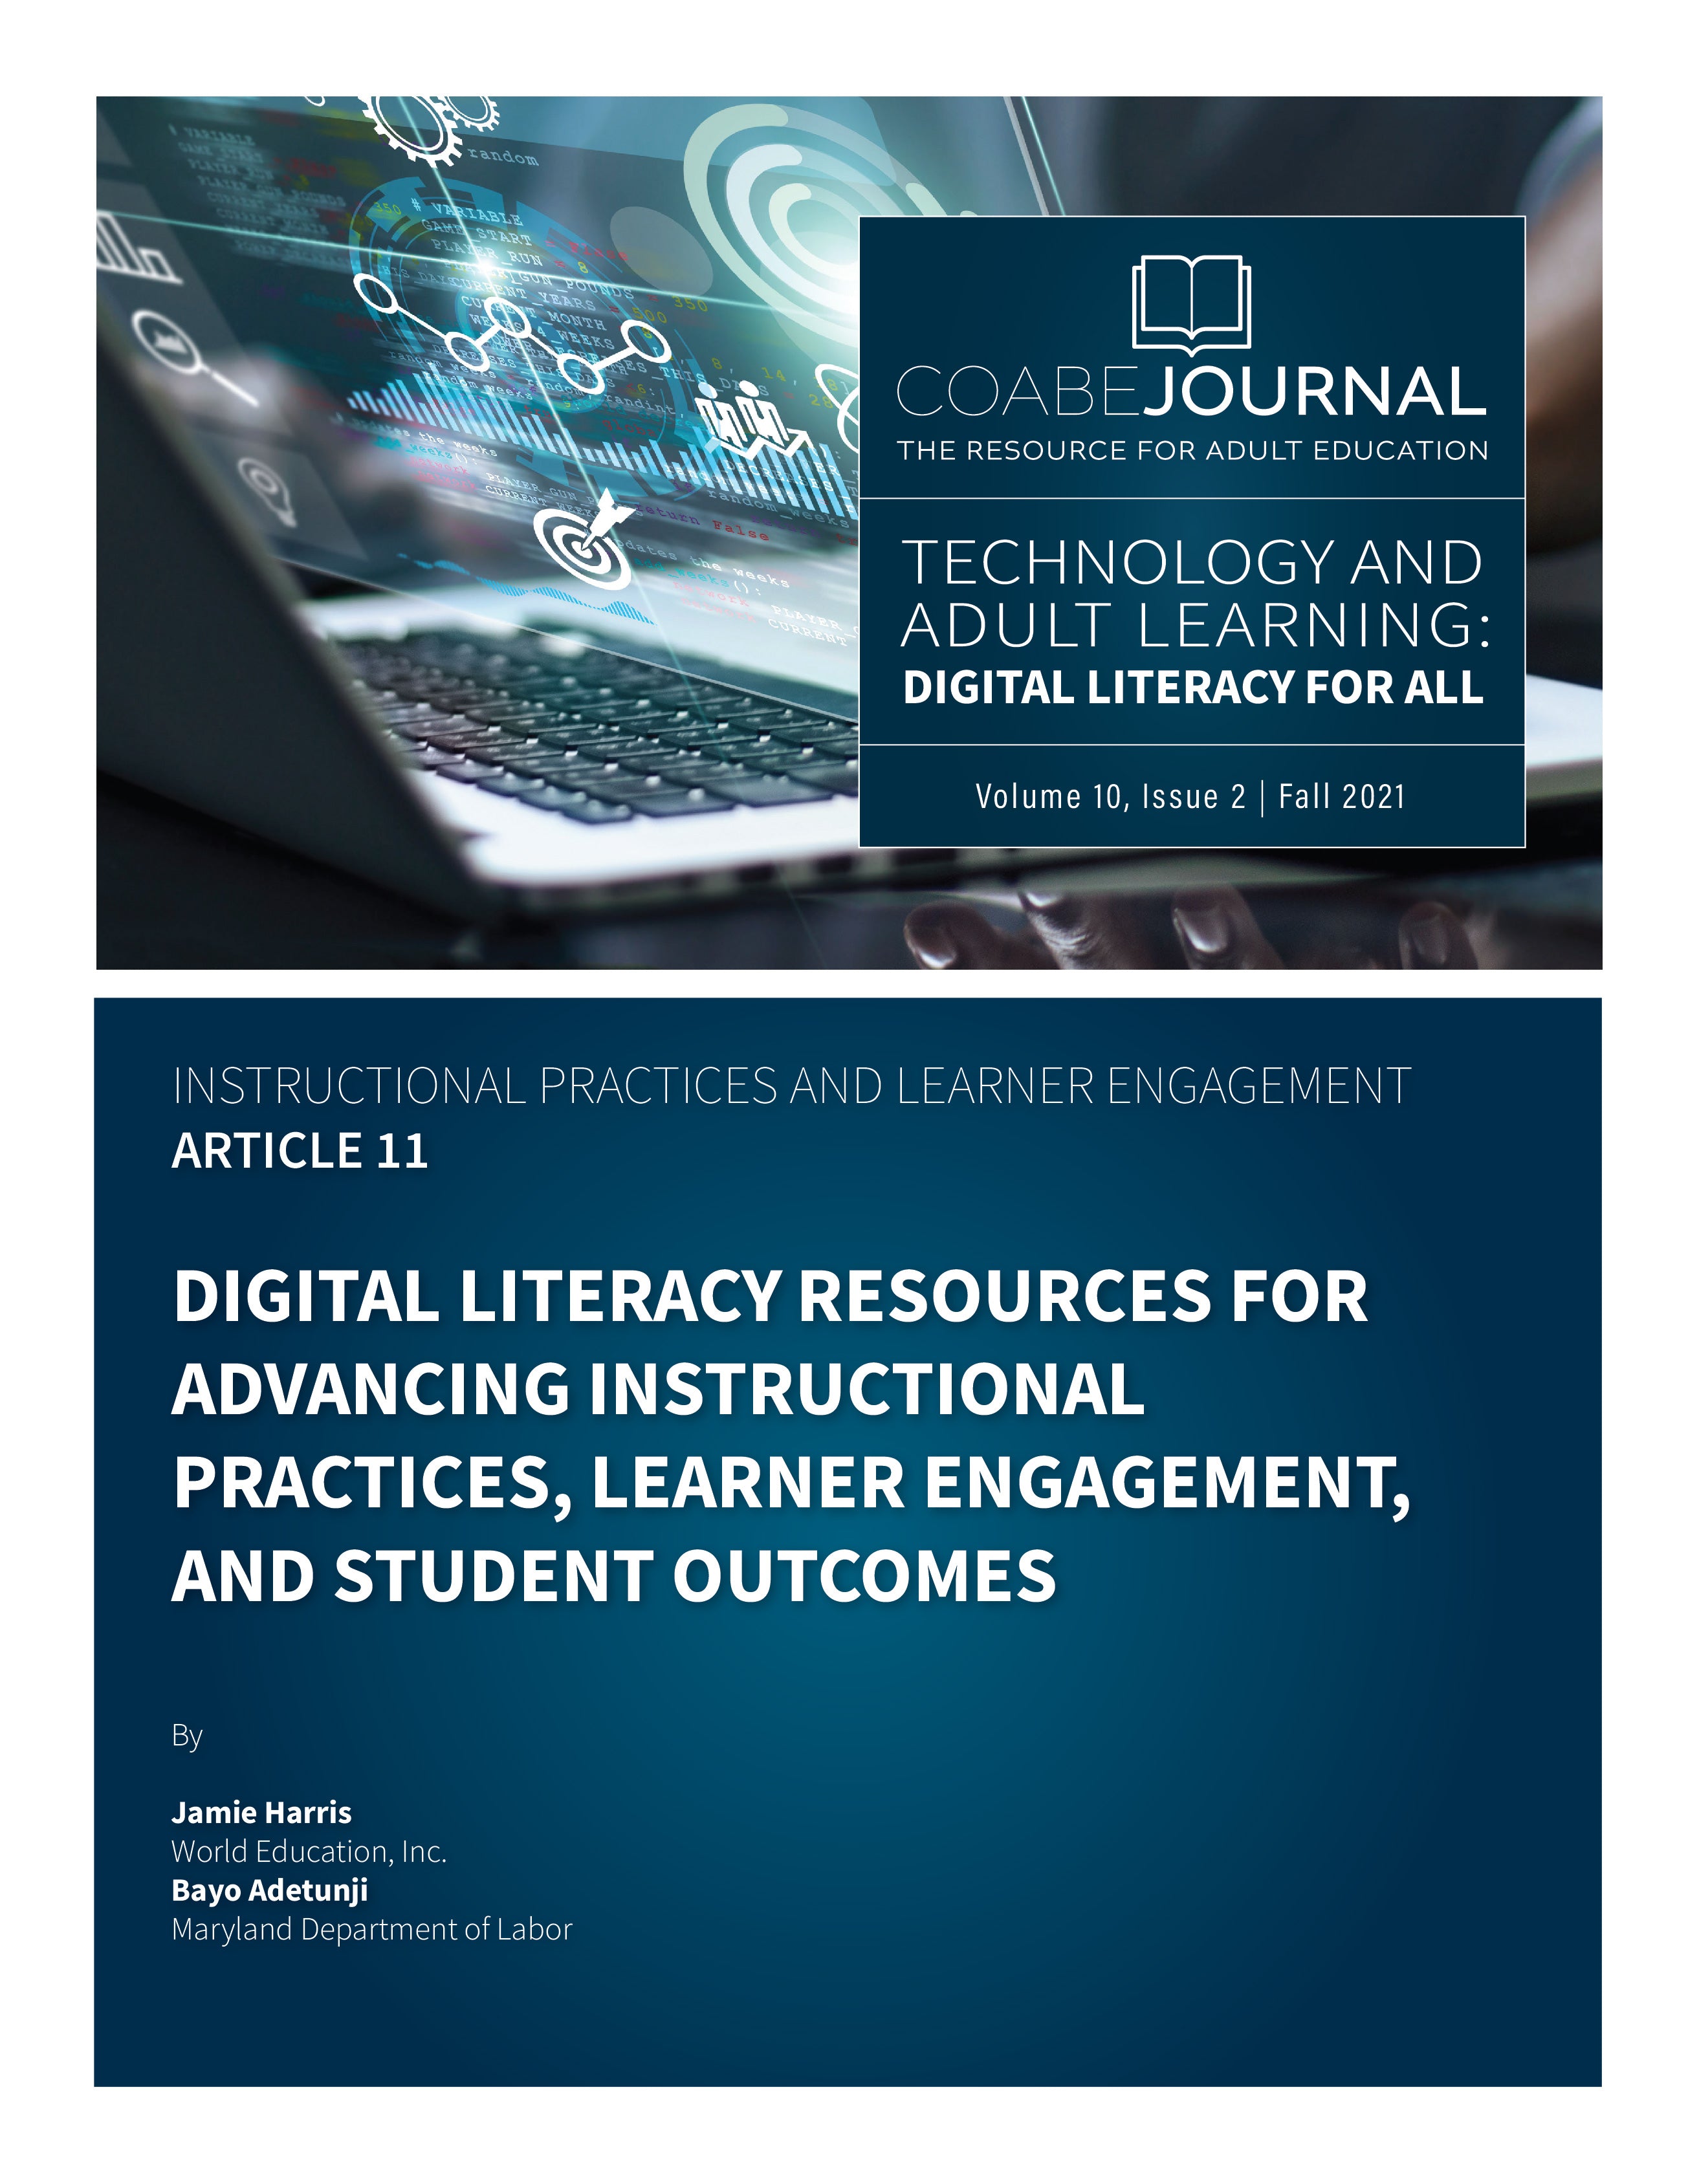 Article 11 | Digital Literacy Resources For Advancing Instructional Practices, Learner Engagement, And Student Outcomes